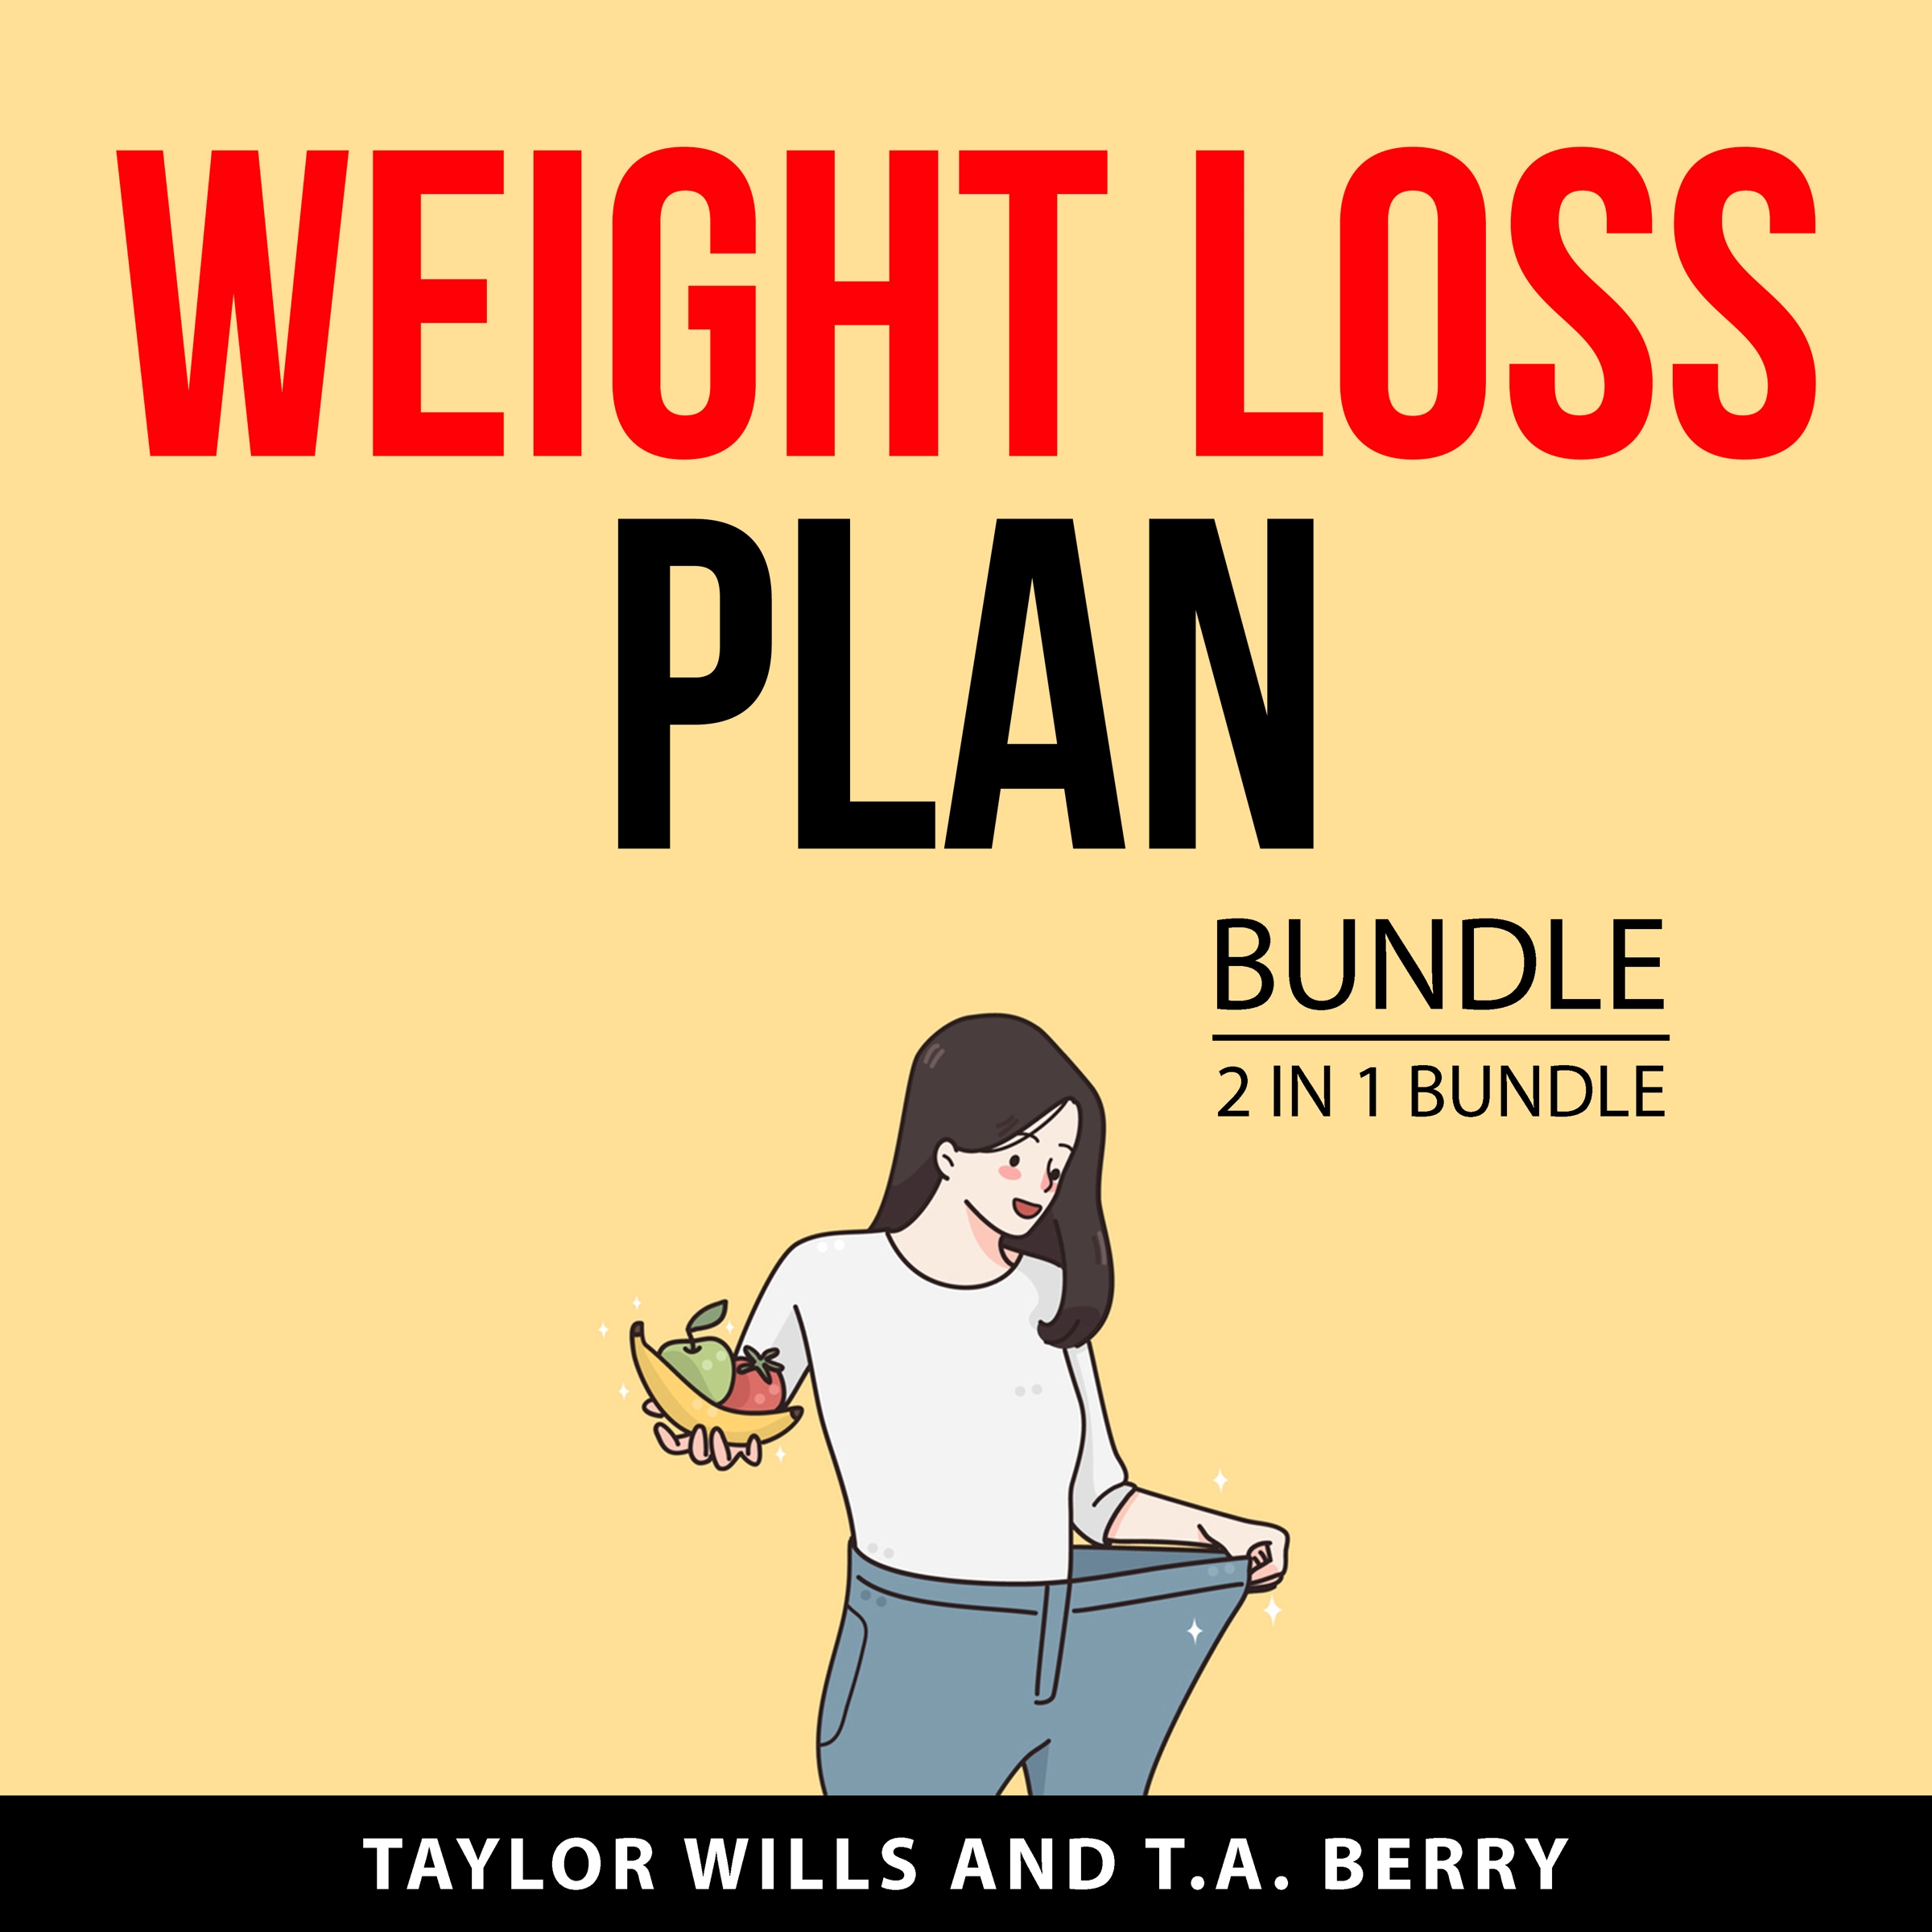 Weight Loss Plan Bundle, 2 in 1 Bundle Audiobook by T.A. Berry